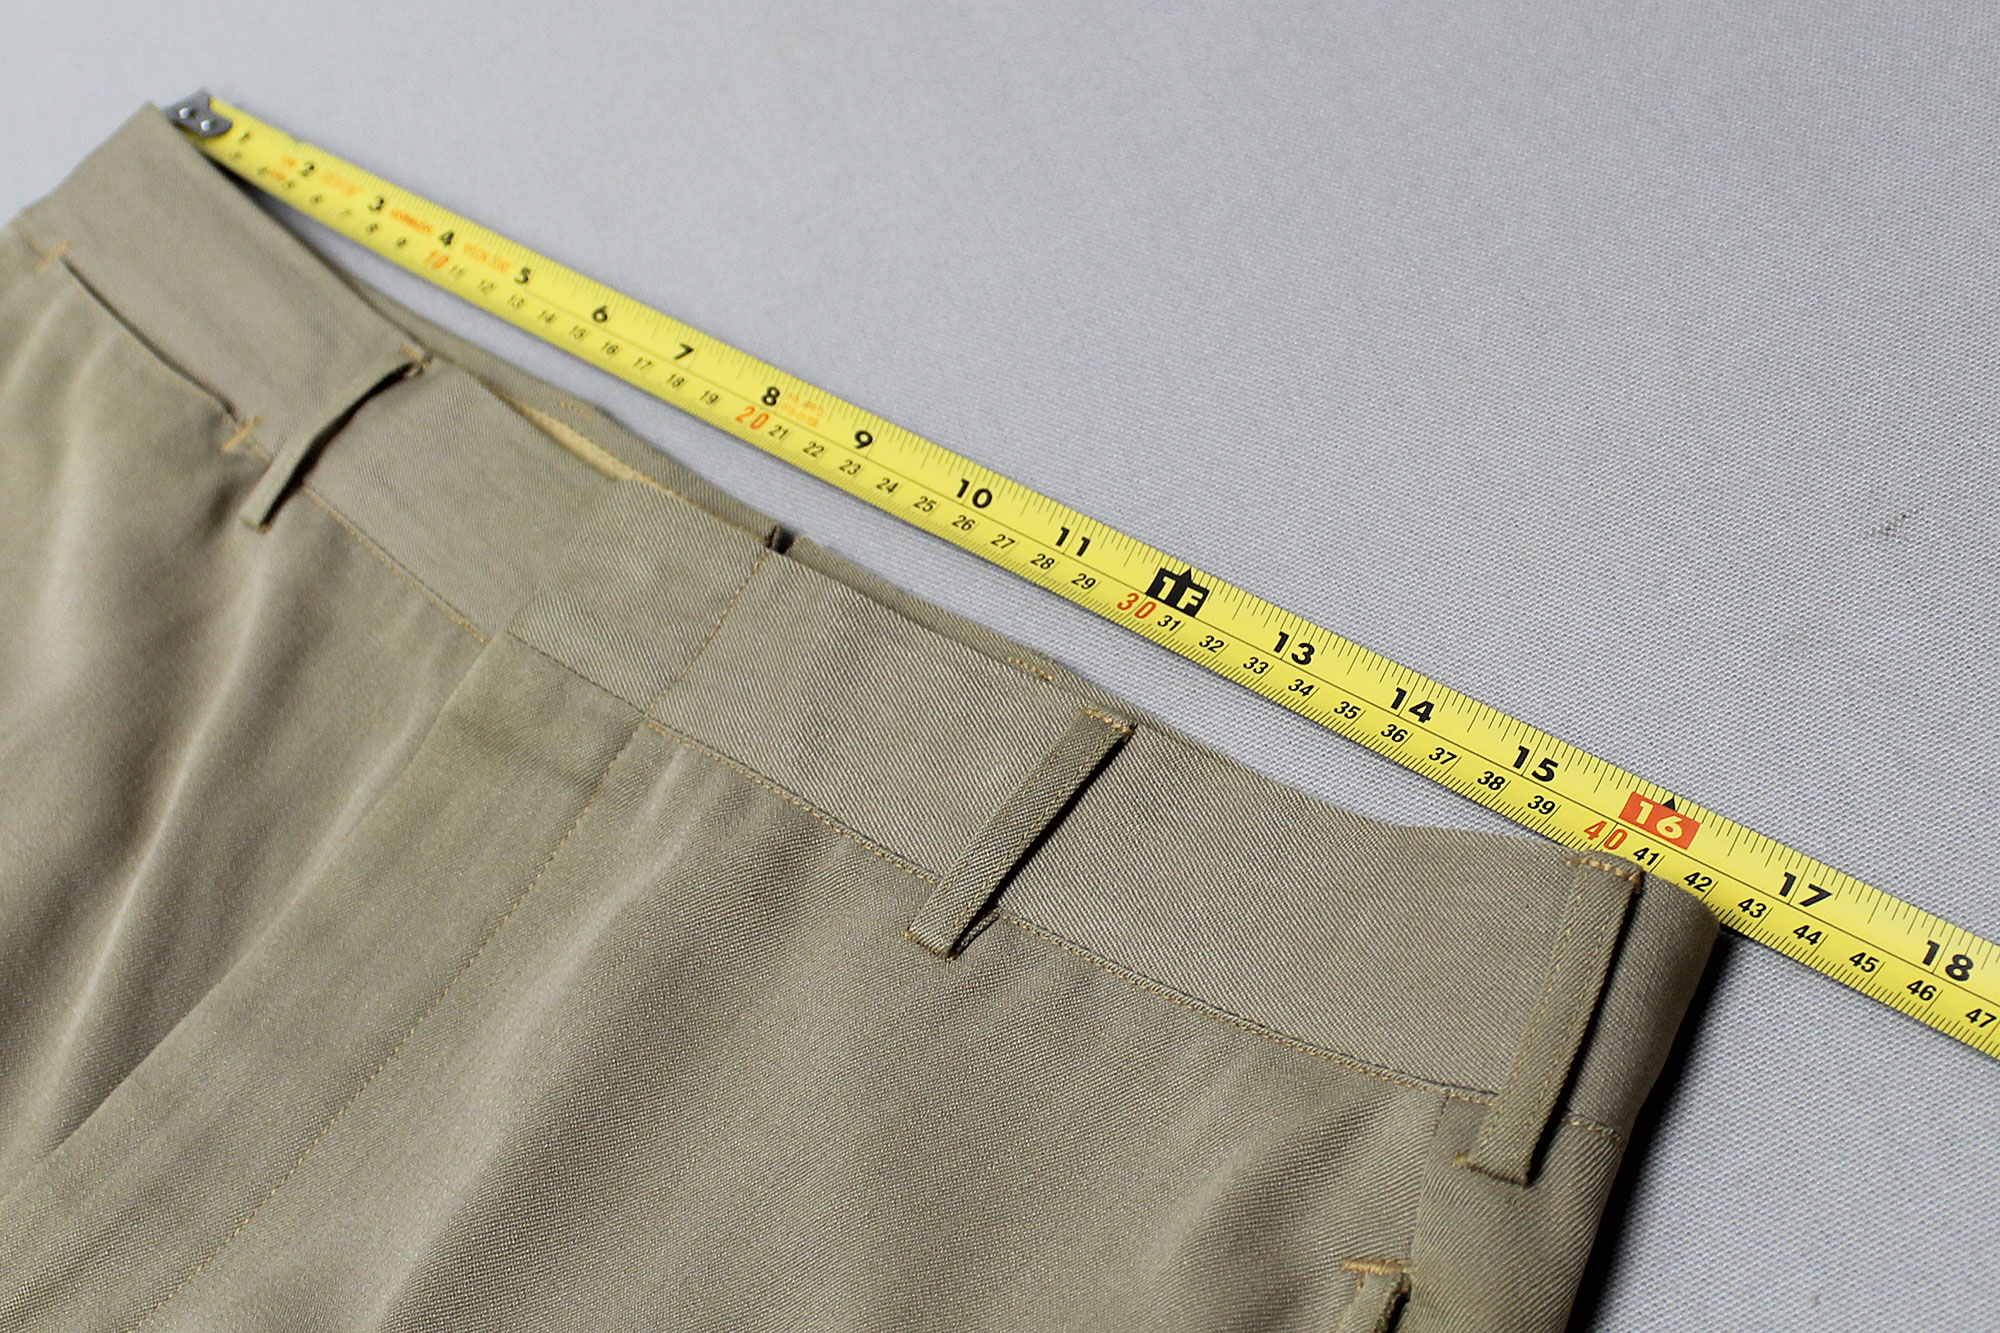 US NAVY KHAKI OFFICERS TROUSER MADE IN U.S.A SIZE: 36R ( 34 ACTUAL